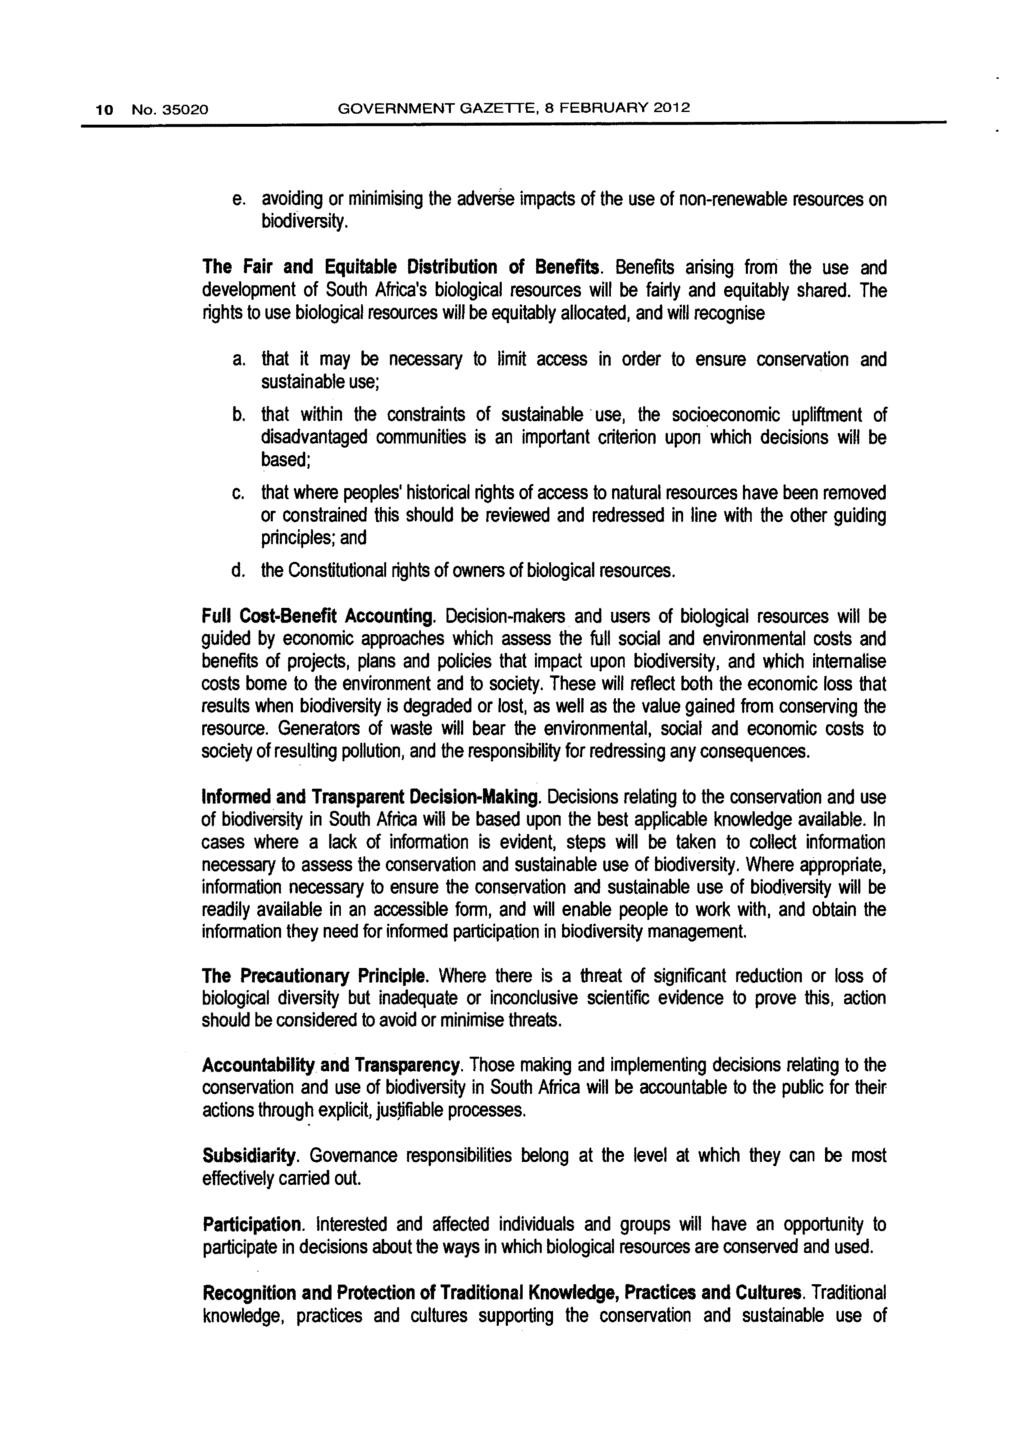 10 No.35020 GOVERNMENT GAZETTE, 8 FEBRUARY 2012 e. avoiding or minimising the adverse impacts of the use of non-renewable resources on biodiversity. The Fair and Equitable Distribution of Benefits.